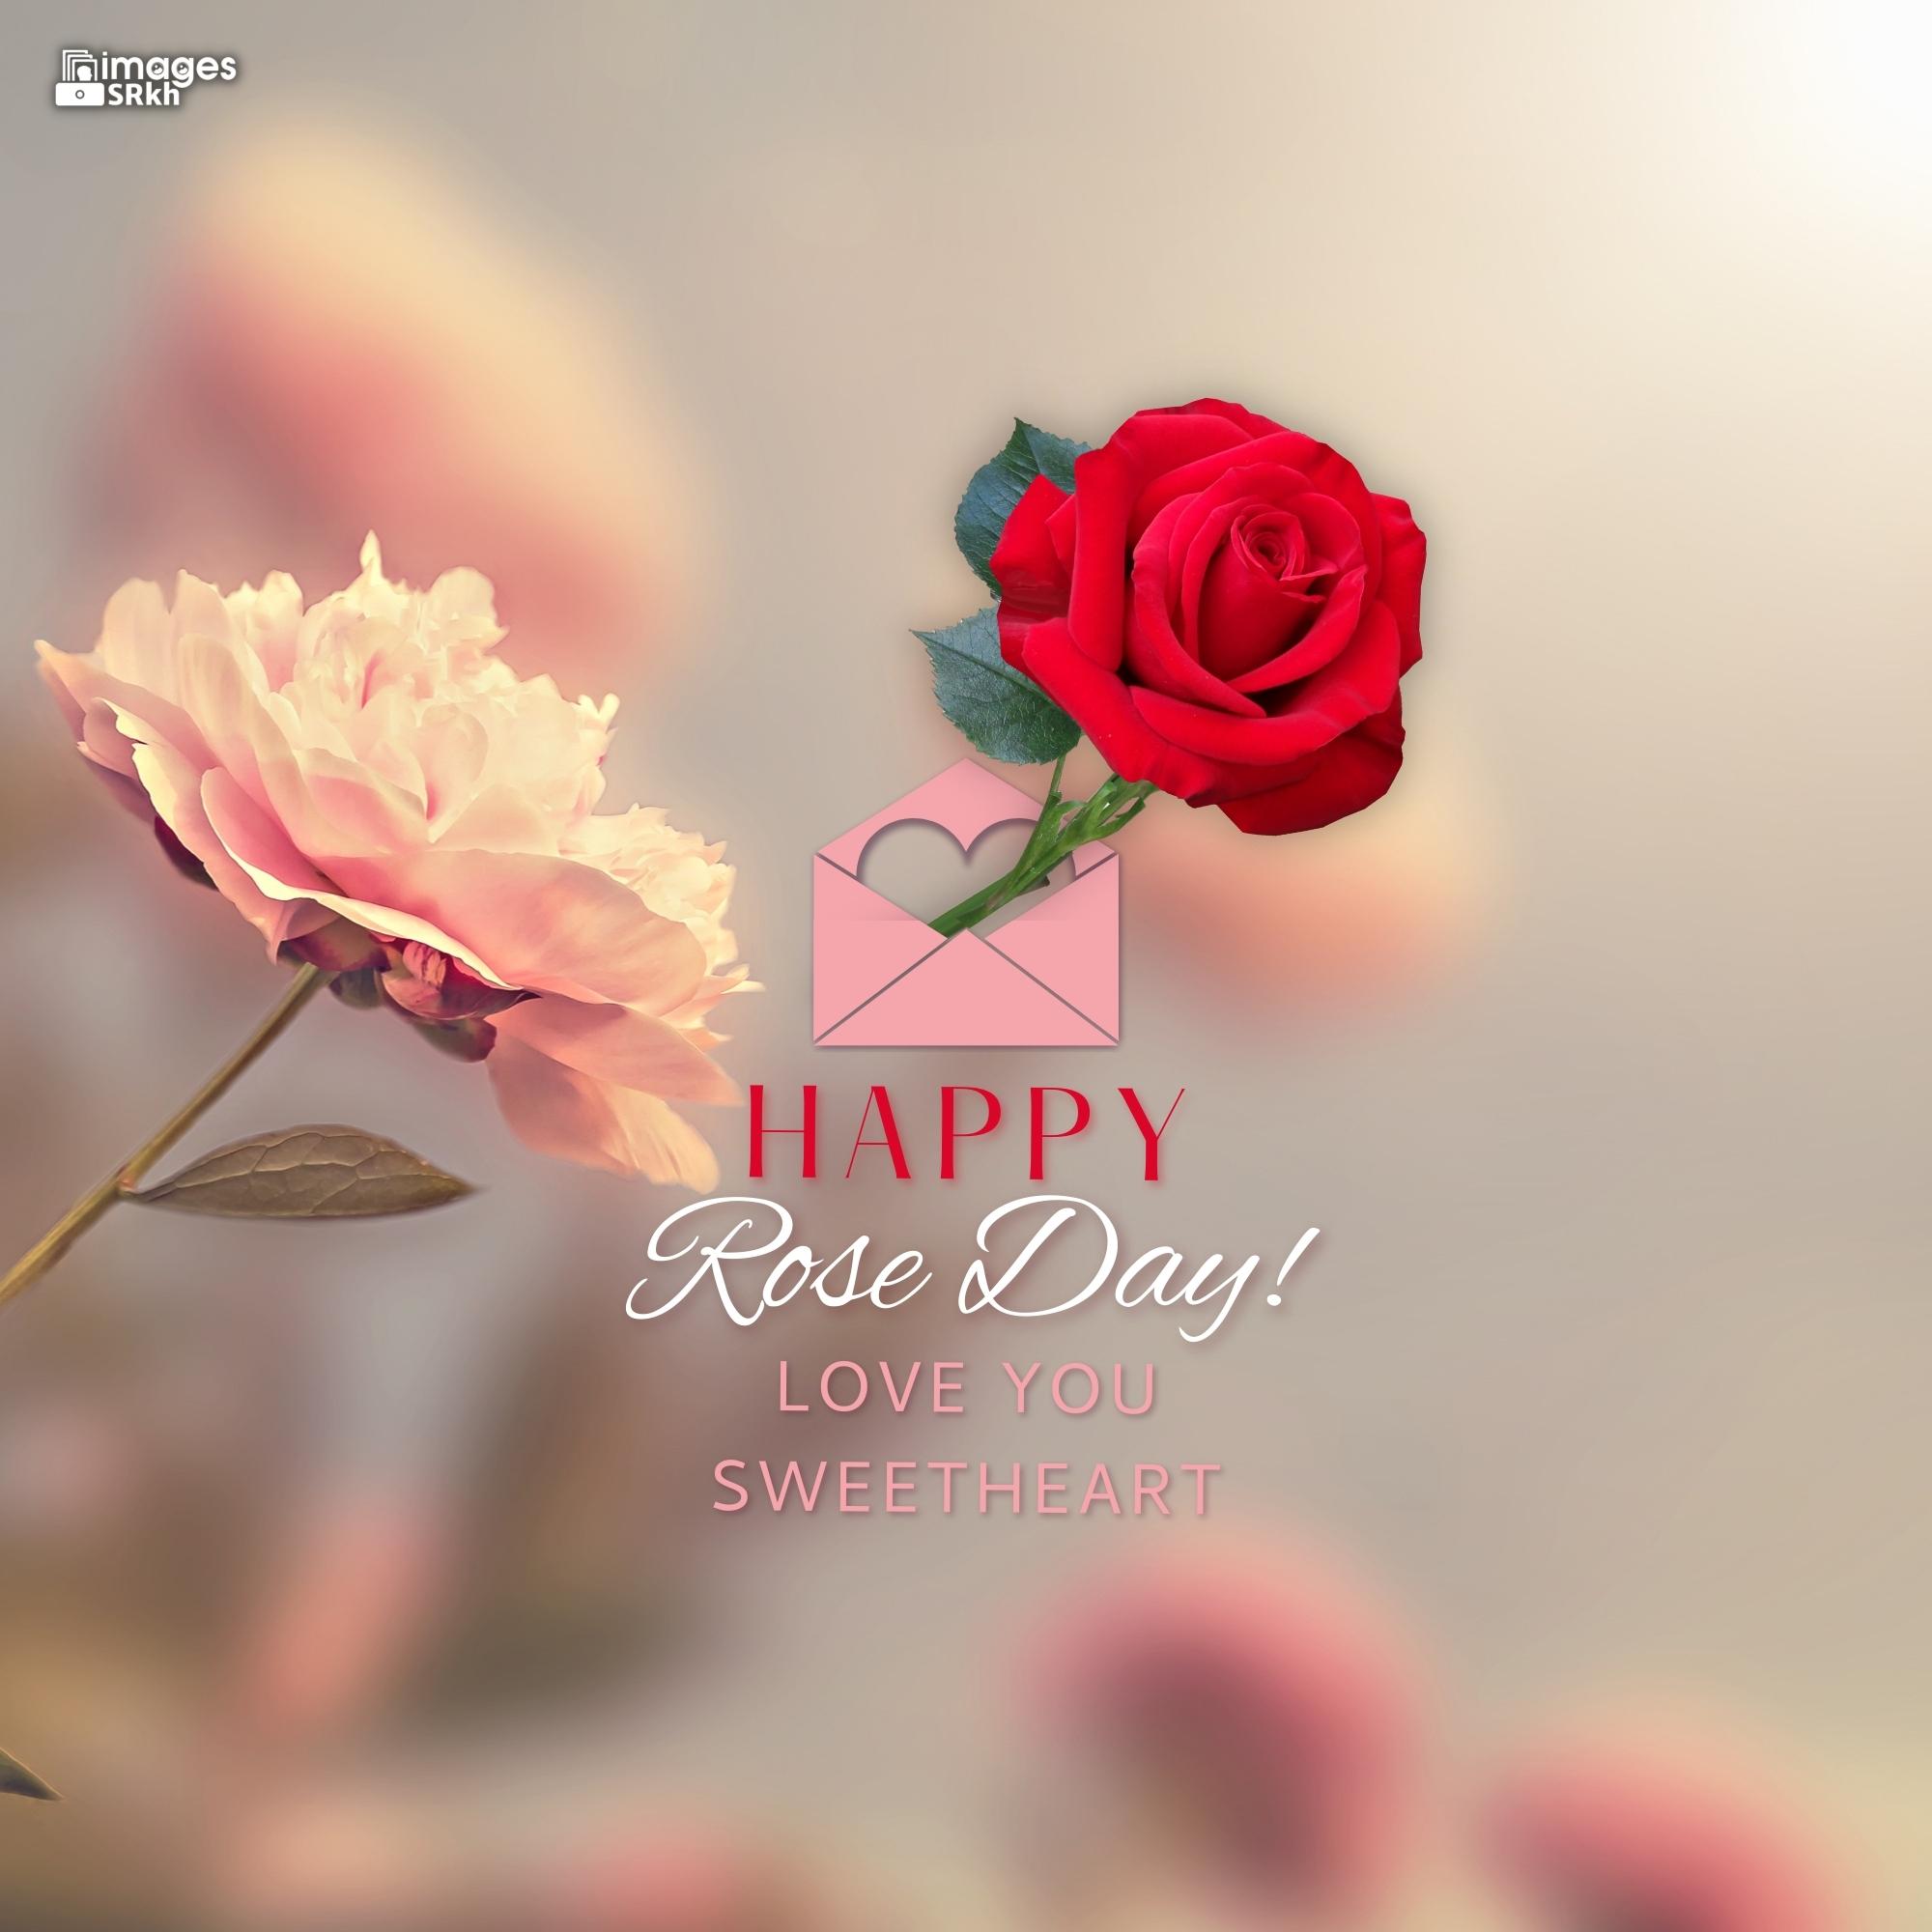 Happy Rose Day Image Hd Download (85)